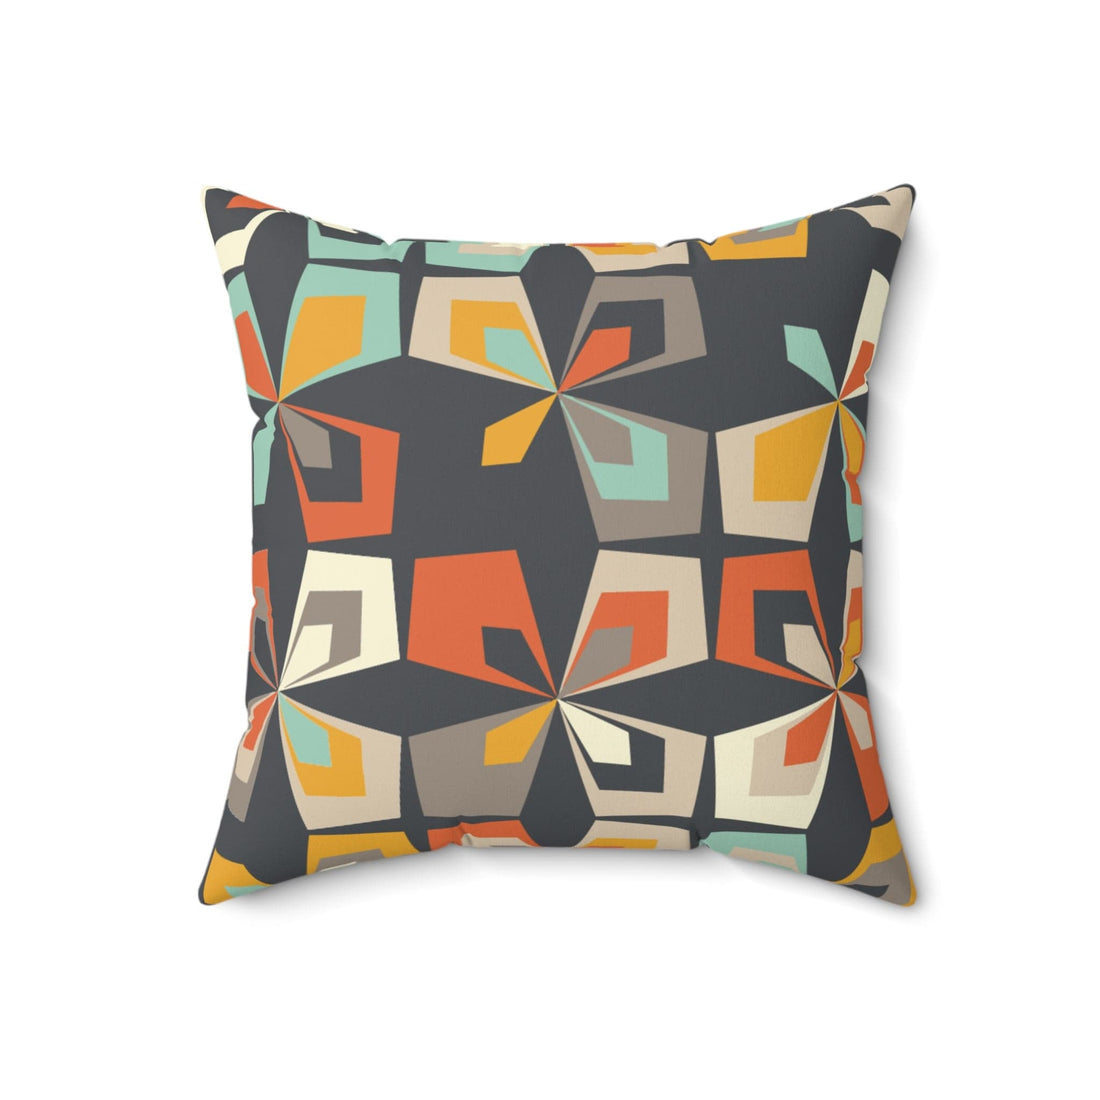 Kate McEnroe New York Mid Century Modern Geometric Throw Pillow with Insert, Retro  Vintage 60s Abstract Floral Living Room, Bedroom Decor Throw Pillows